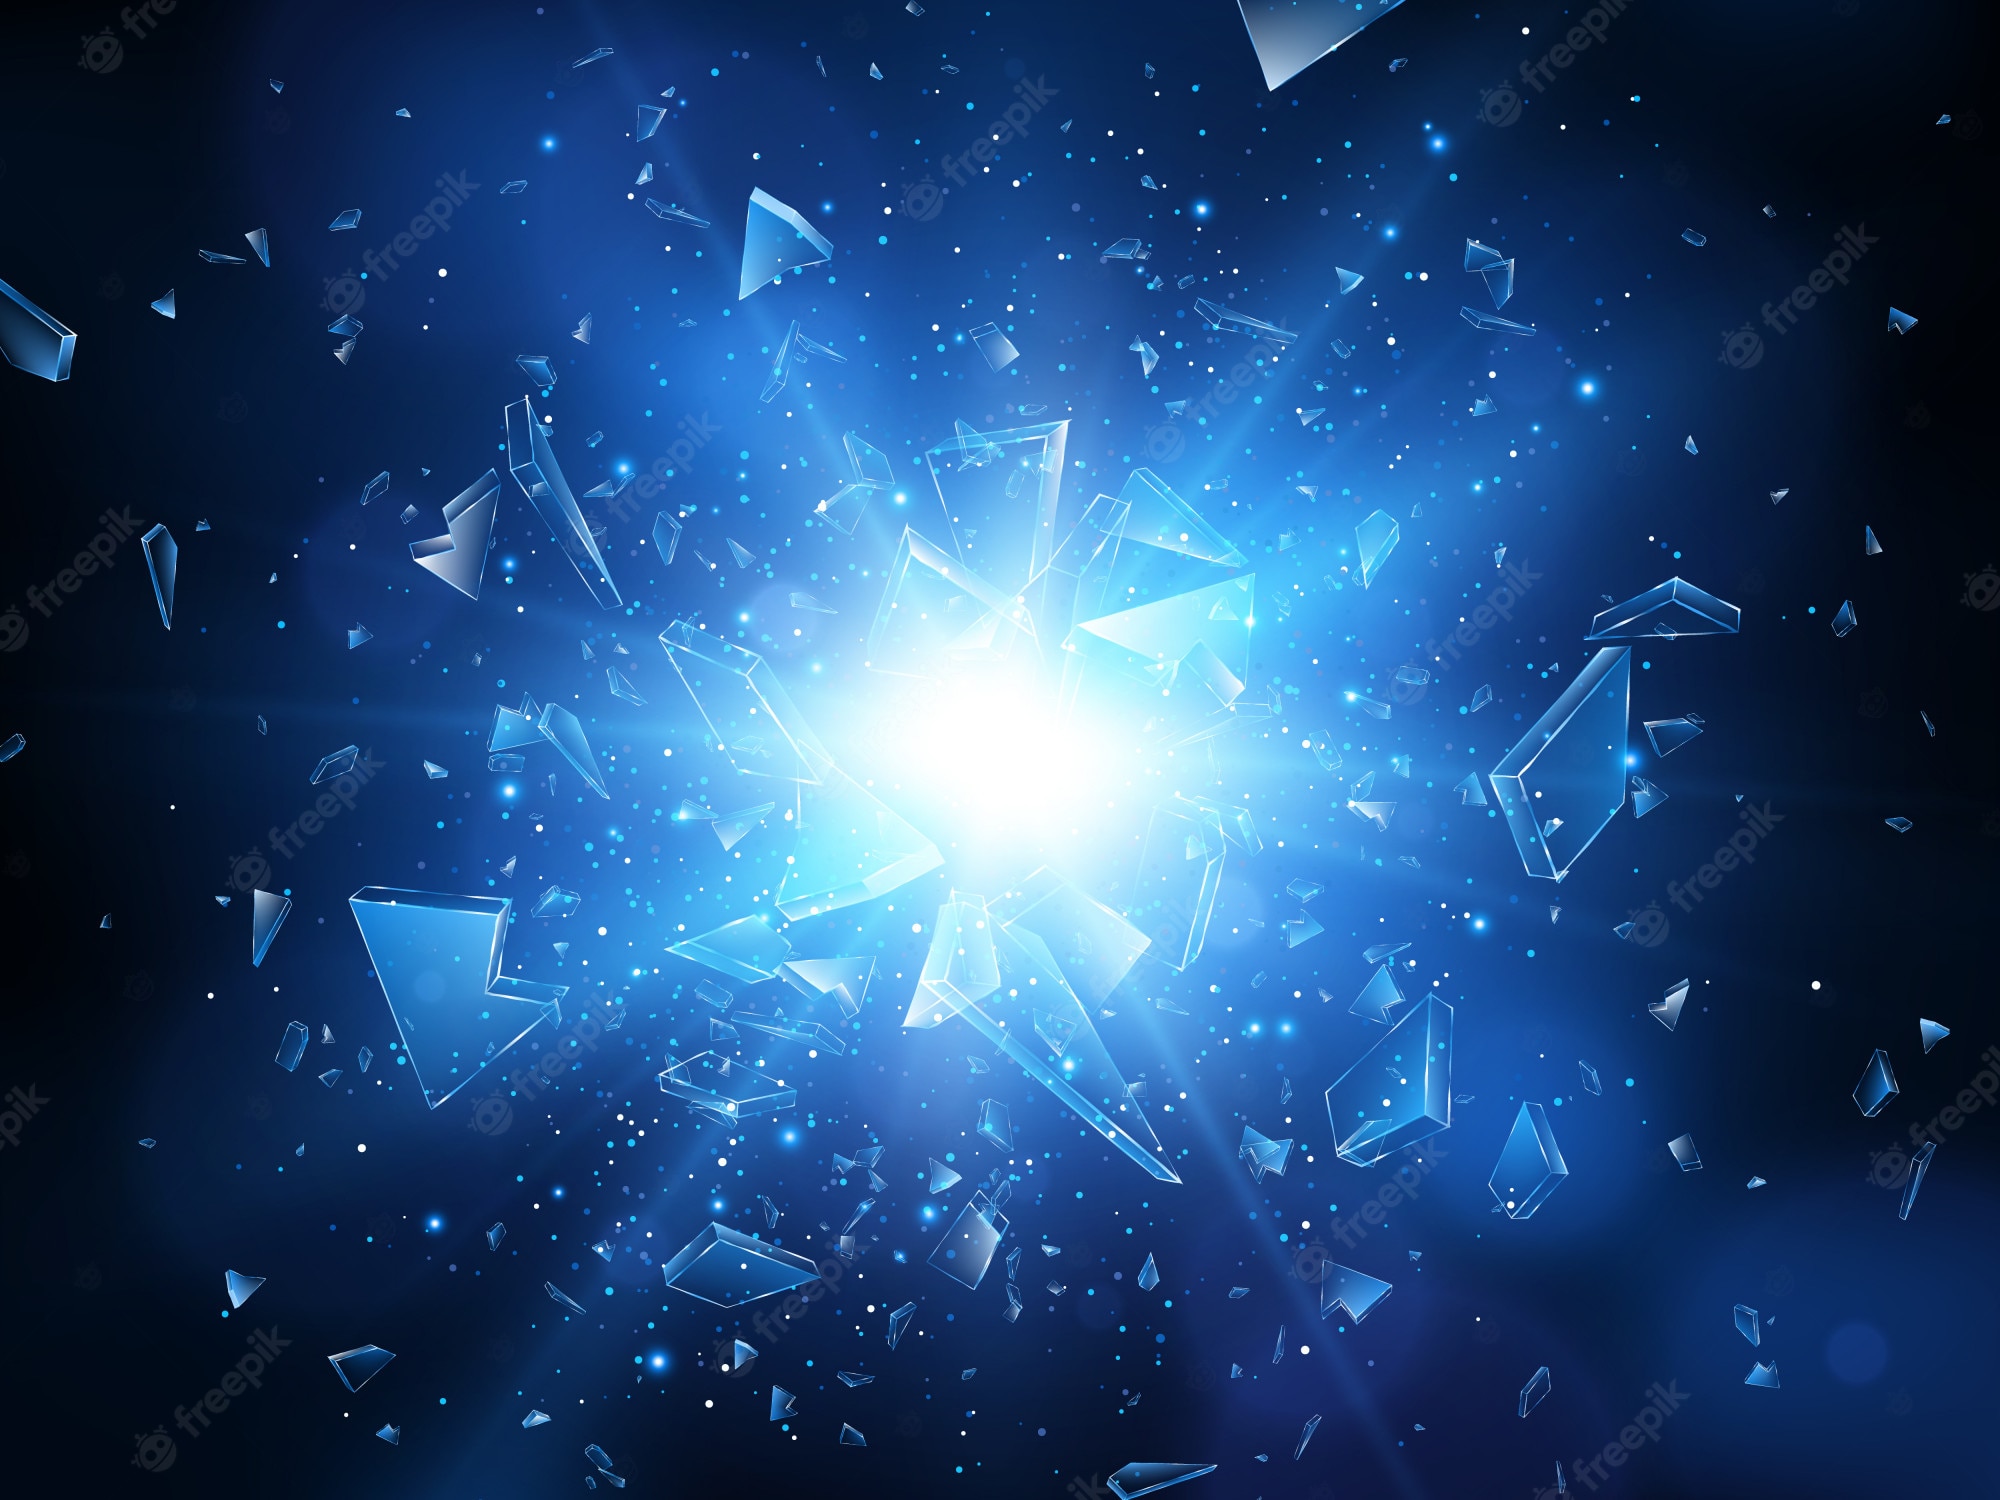 Blue Fragment Shards Abstraction Wallpapers